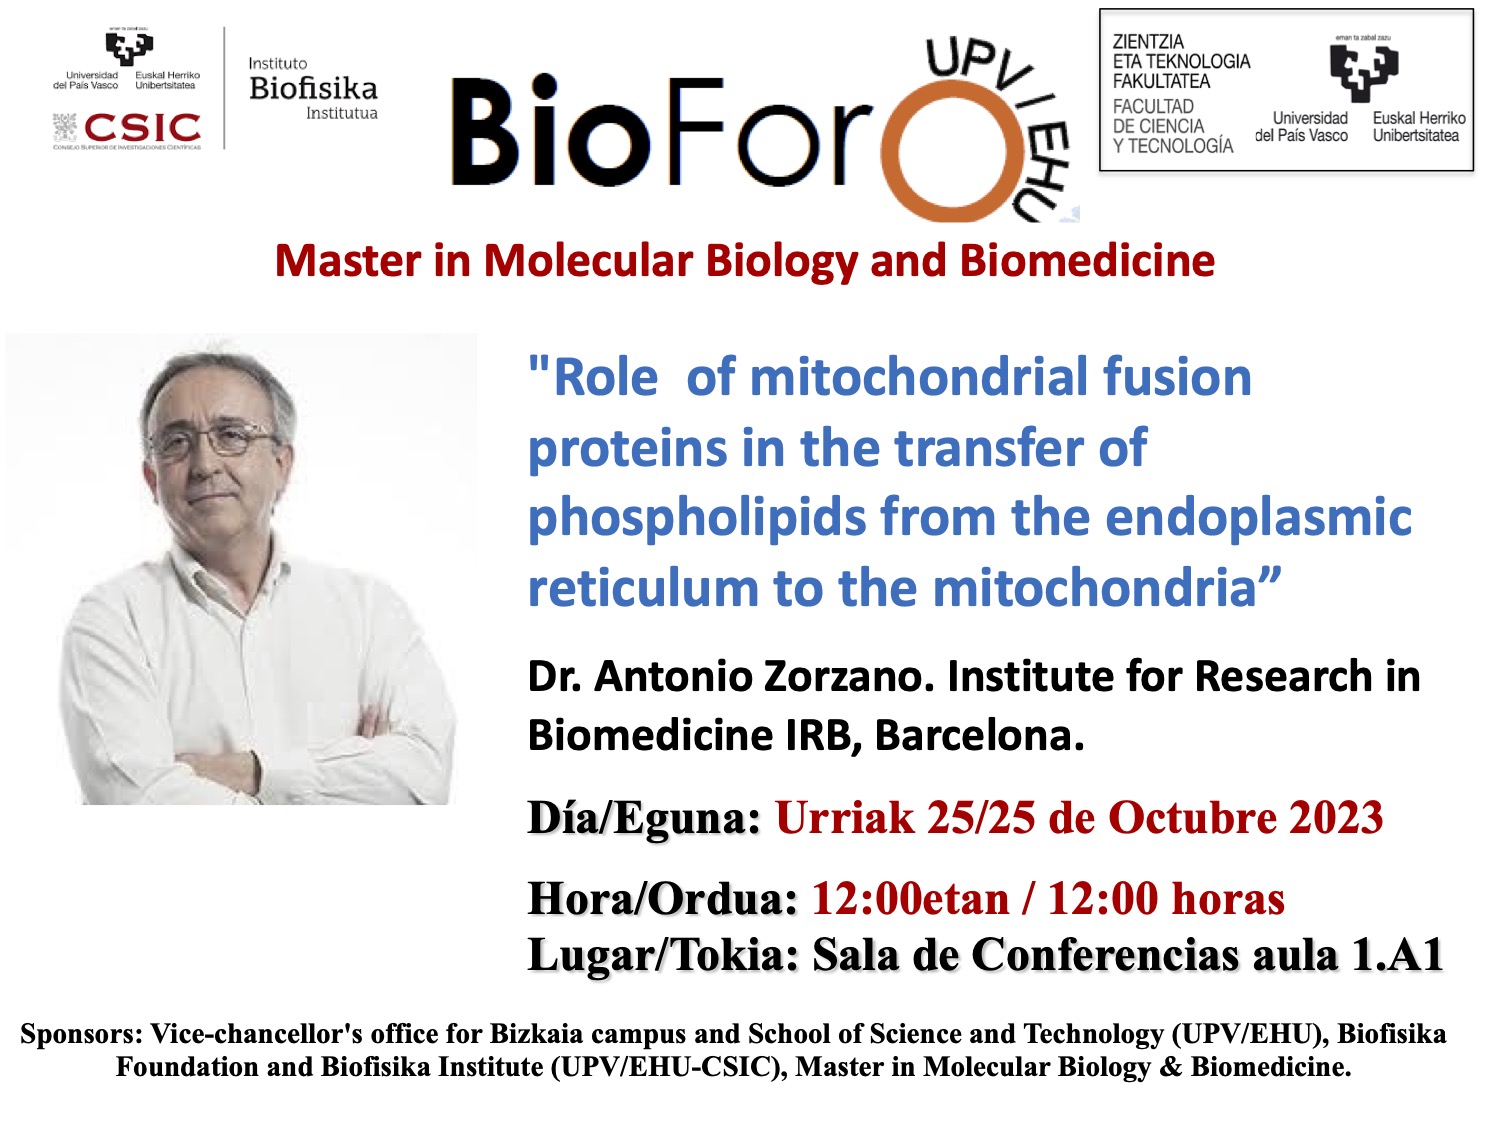 BioForo seminar: "Role of mitochondrial fusion proteins in the transfer of phospholipids from the endoplasmic reticulum to the mitochondria"